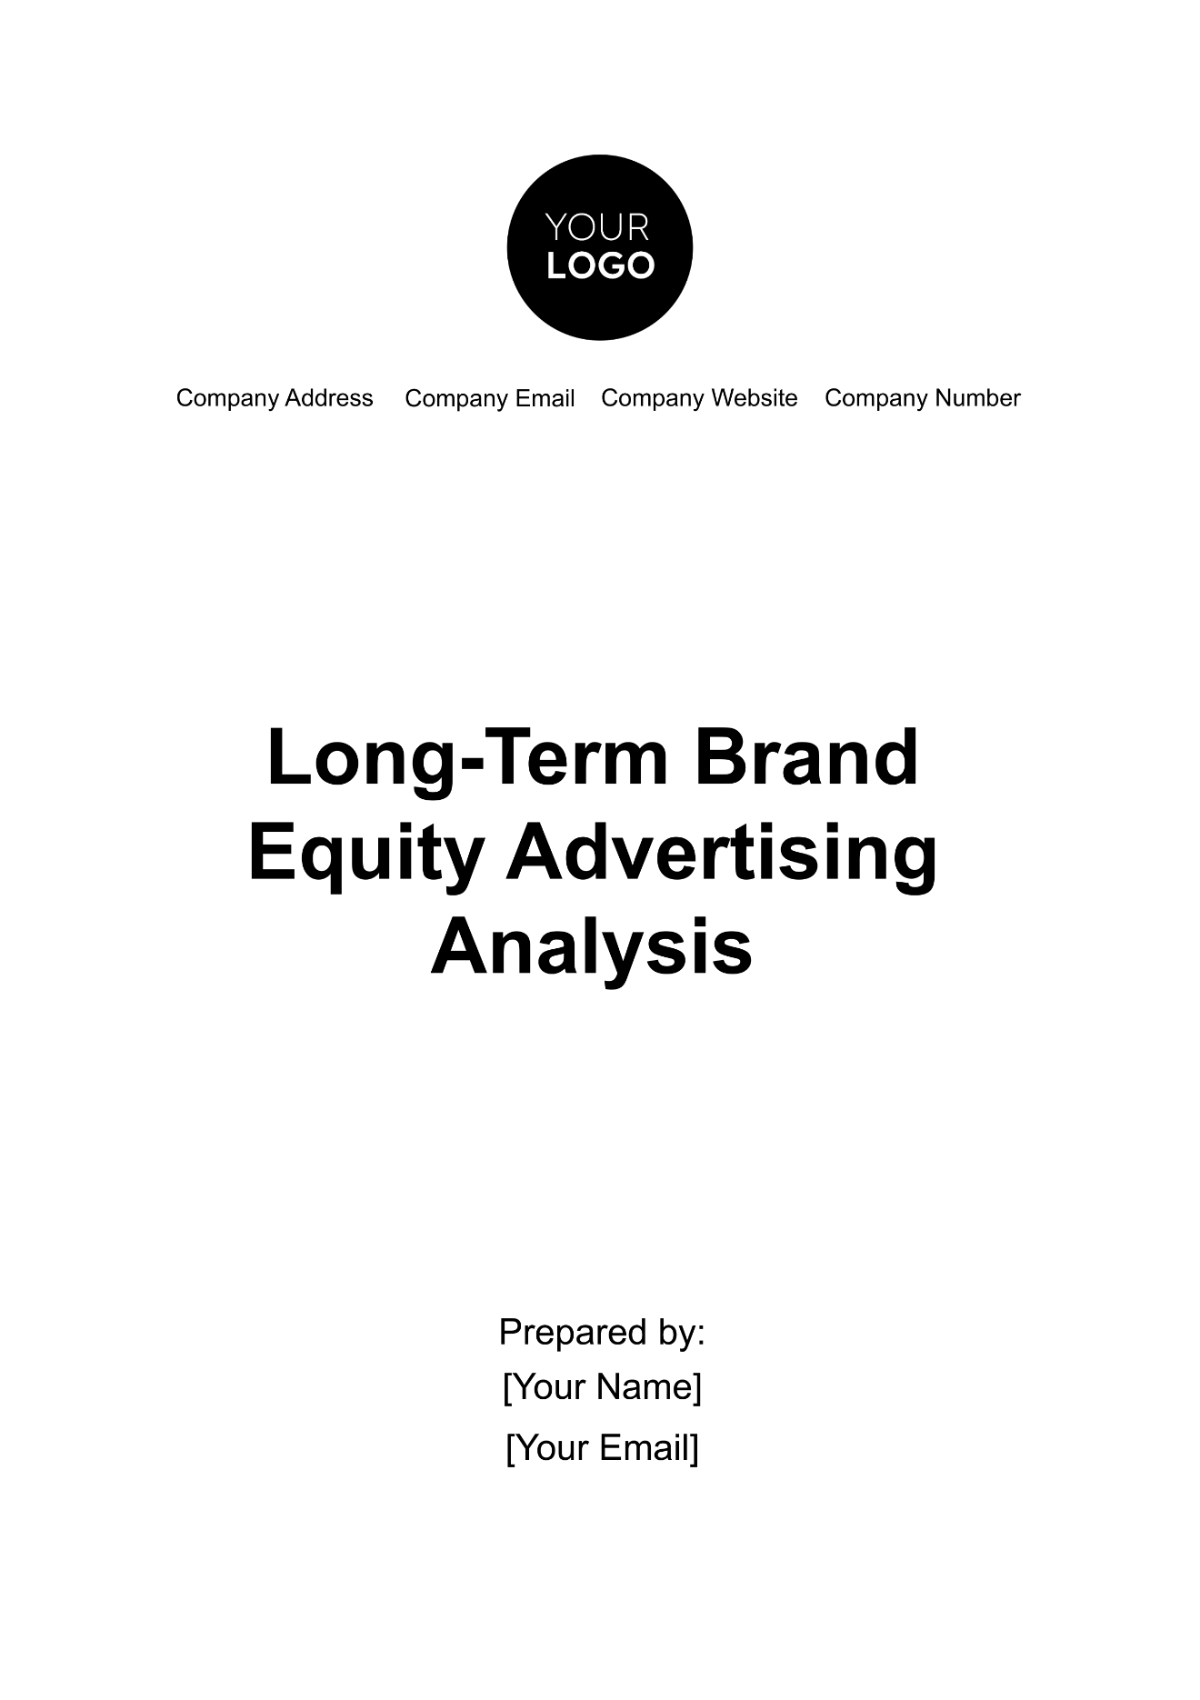 Long-Term Brand Equity Advertising Analysis Template